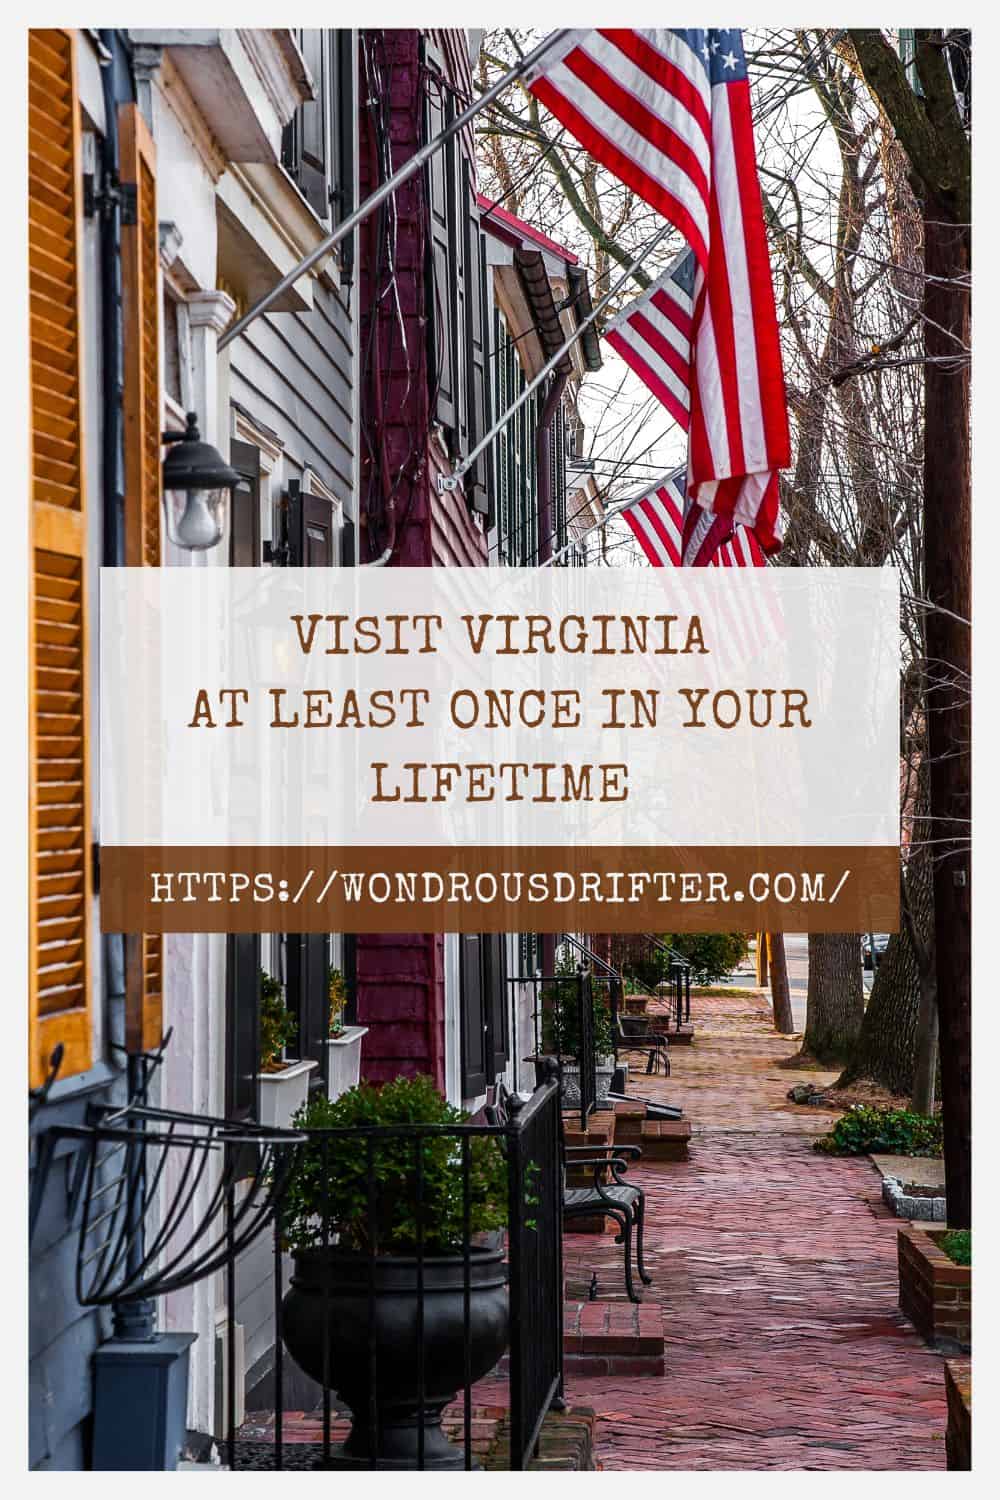 Visit Virginia at least once in your lifetime